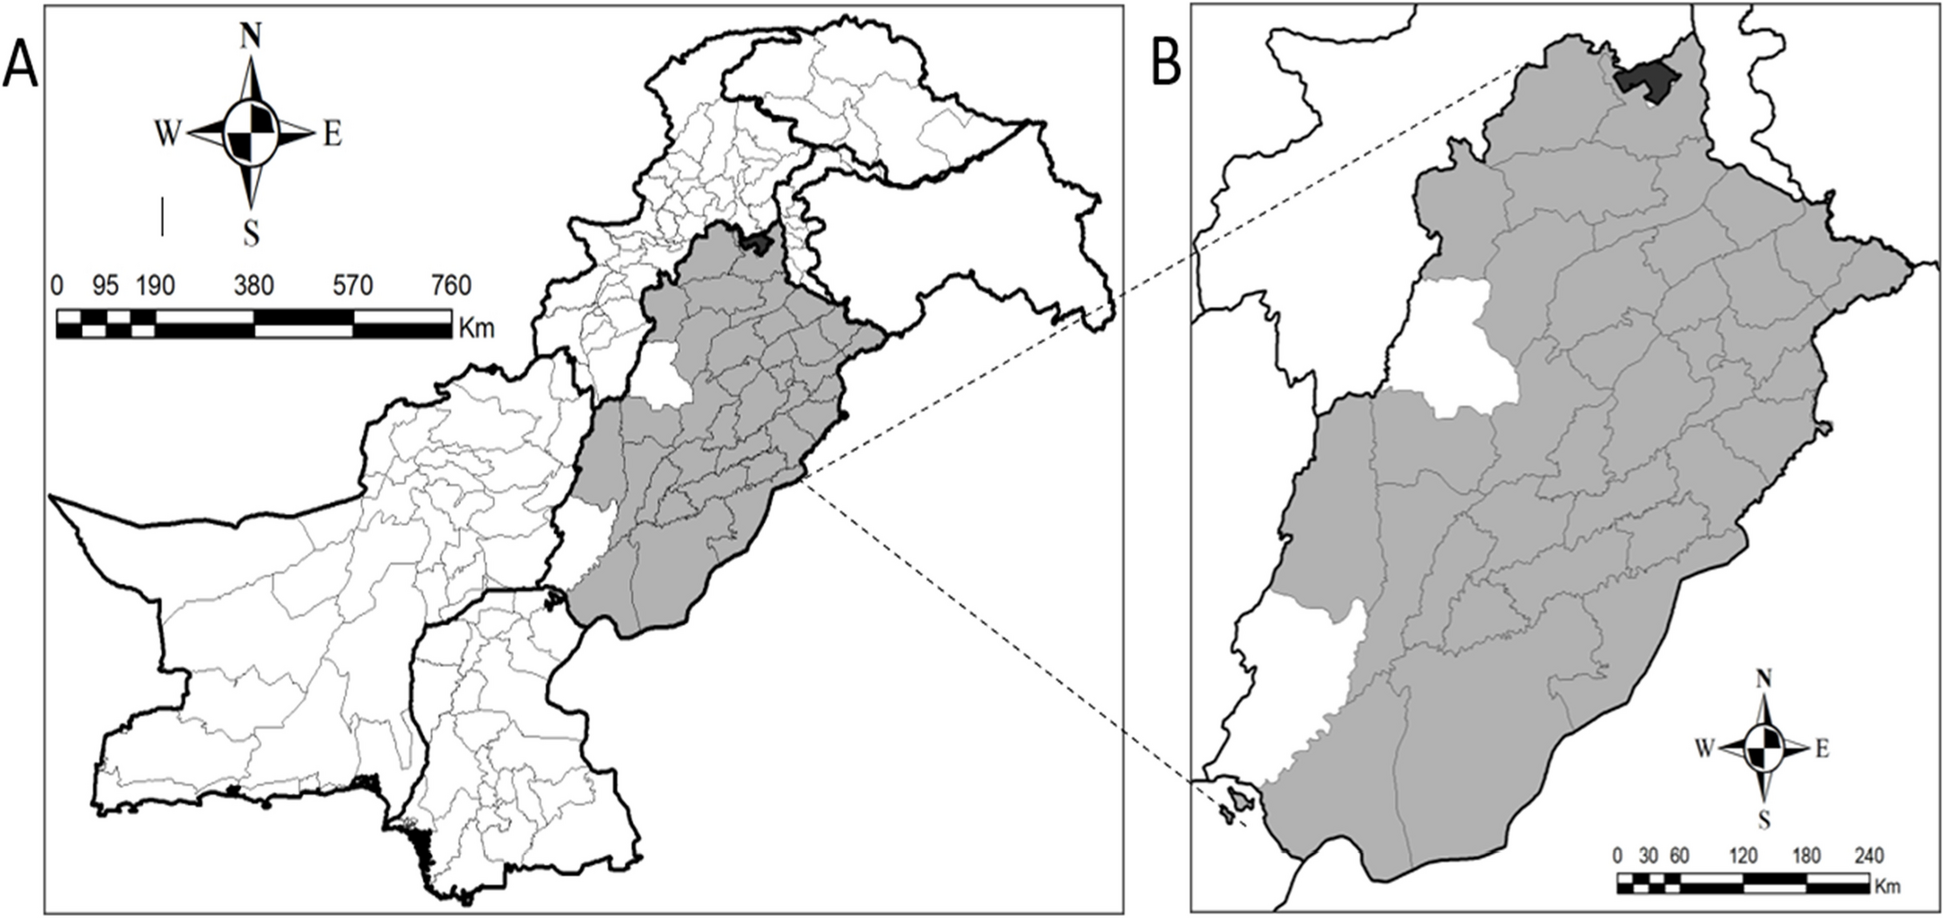 Demographic and clinical features of dengue fever infection in Pakistan: a cross-sectional epidemiological study